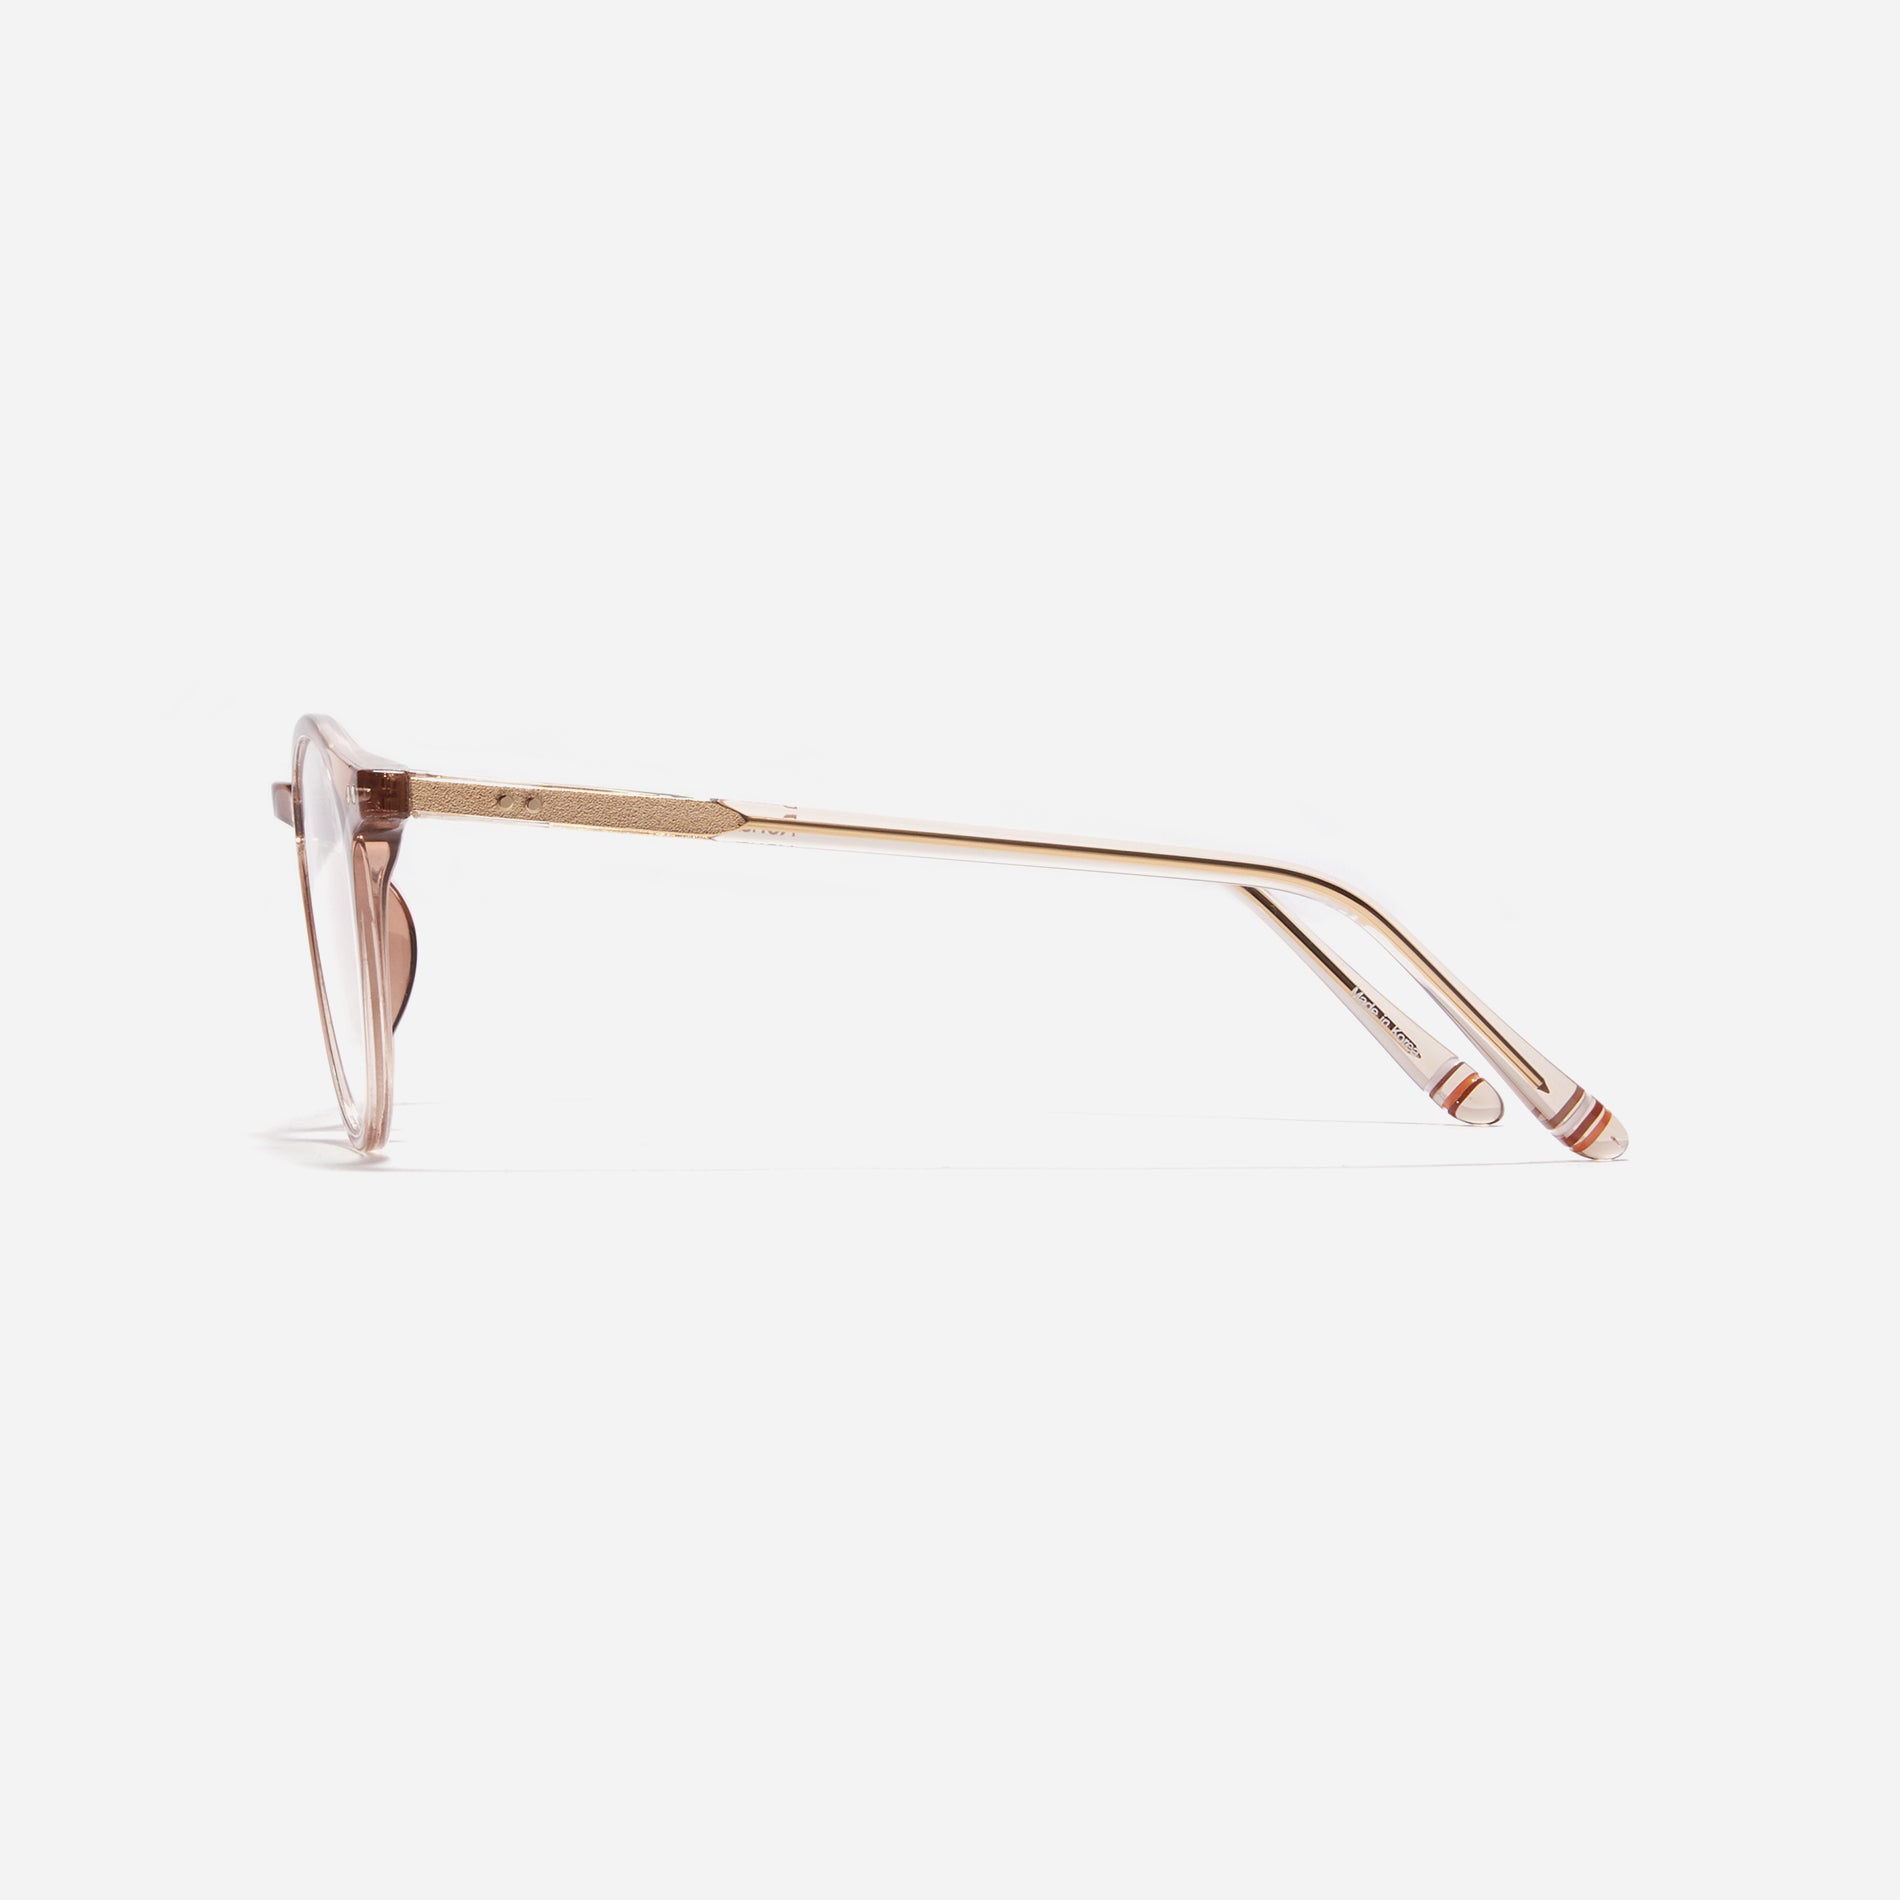 Round-shaped horn-rimmed eyeglasses featuring a sturdy and lightweight frame. Rena design incorporates dual lining on the tips to prevent slipping and ensure a consistently comfortable wearing experience.